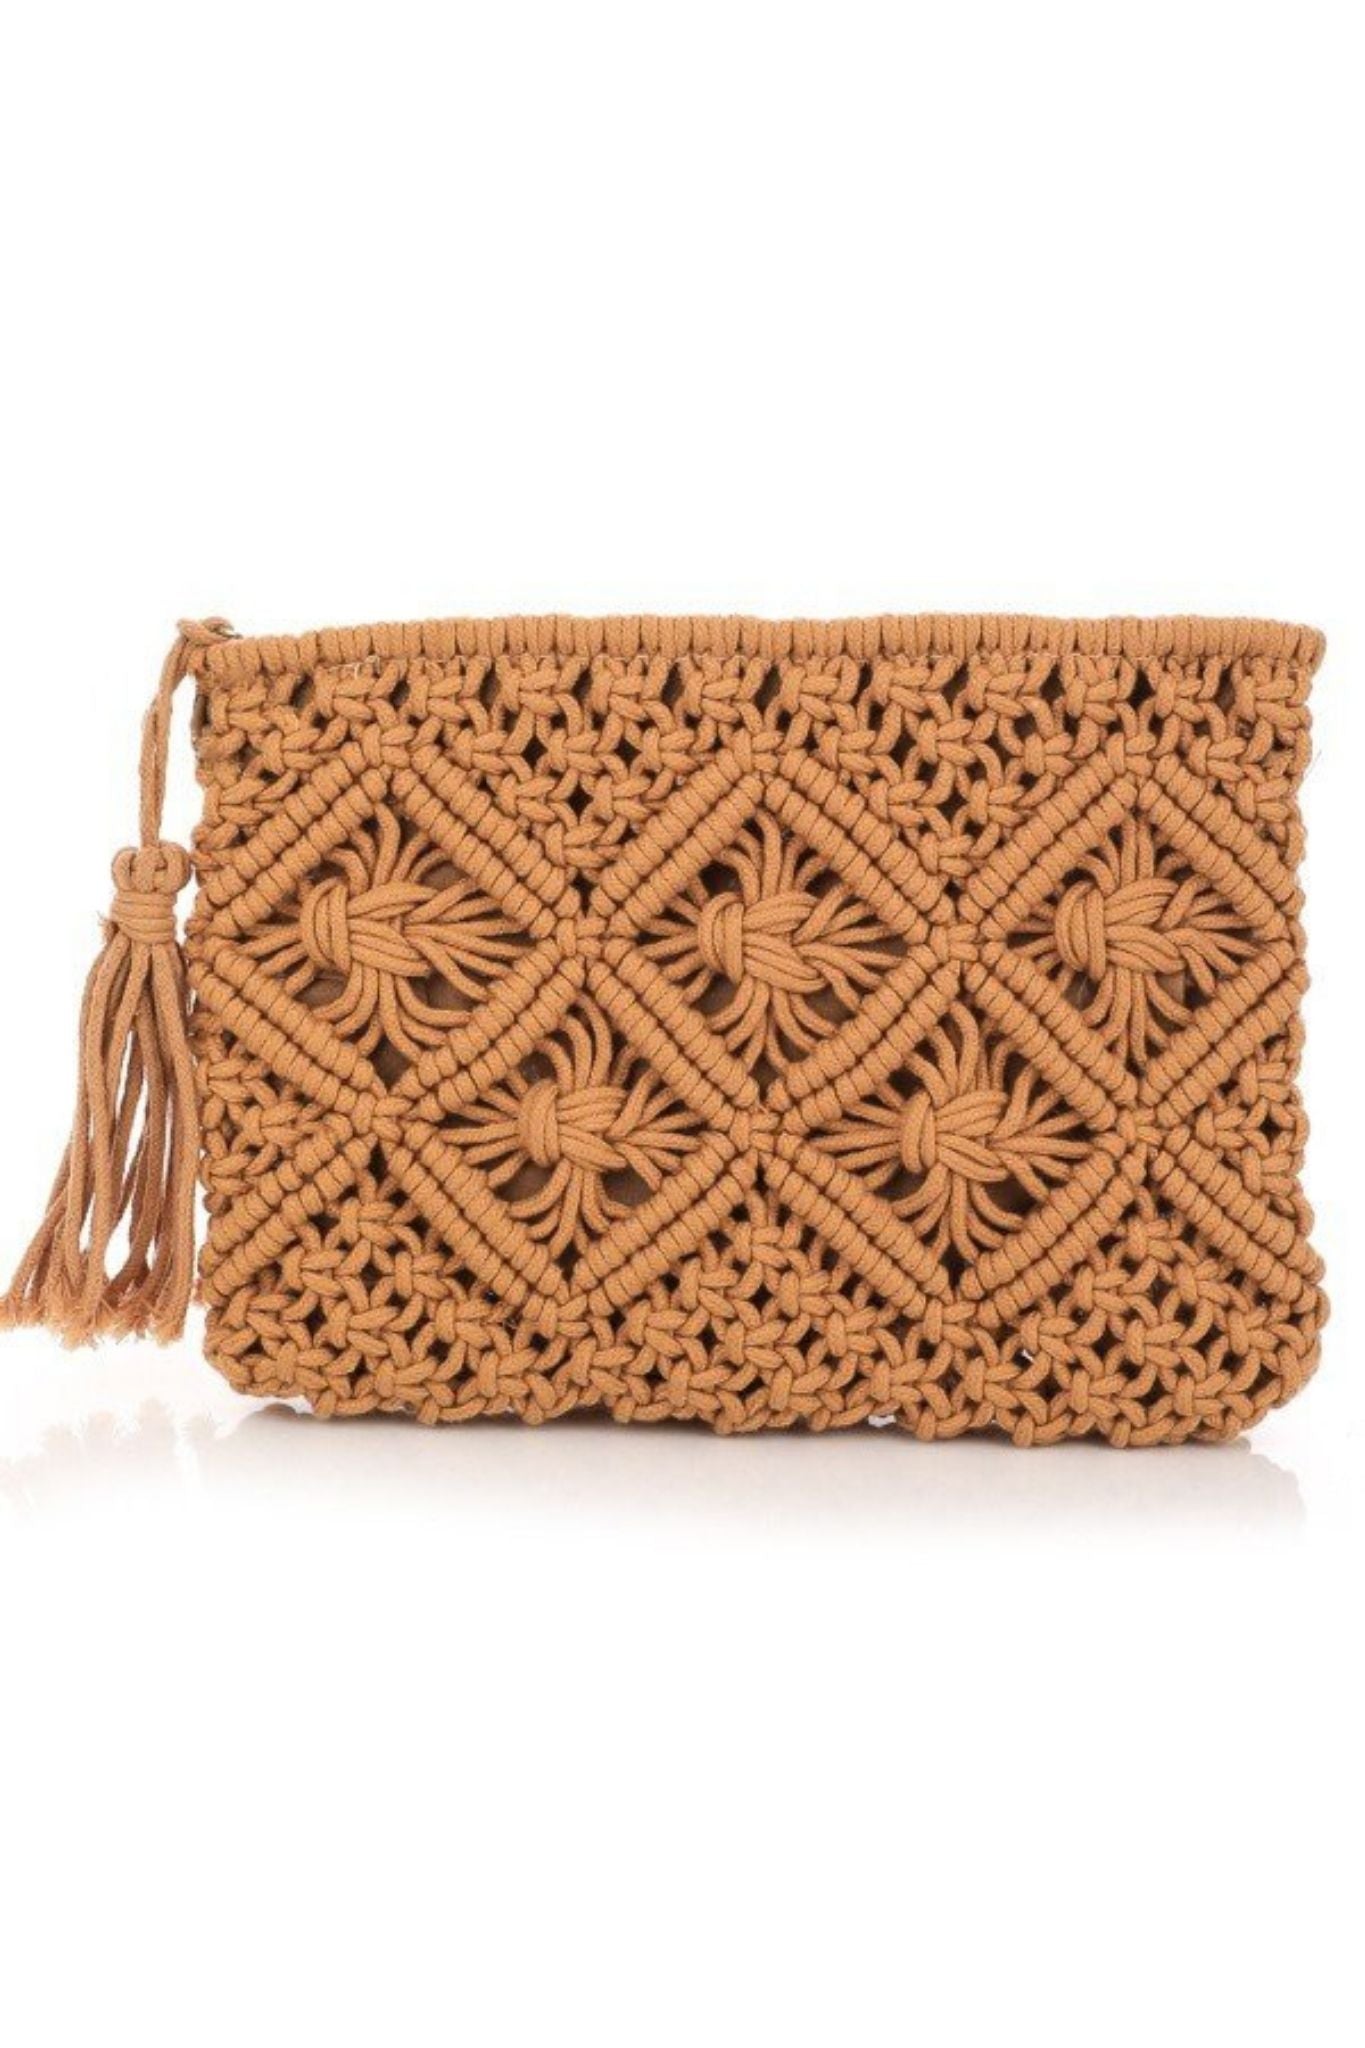 View 1 of Crochet Tassel Clutch in Tan, a Bags from Larrea Cove. Detail: 
Whether you're going for a beachy vibe or a boho...